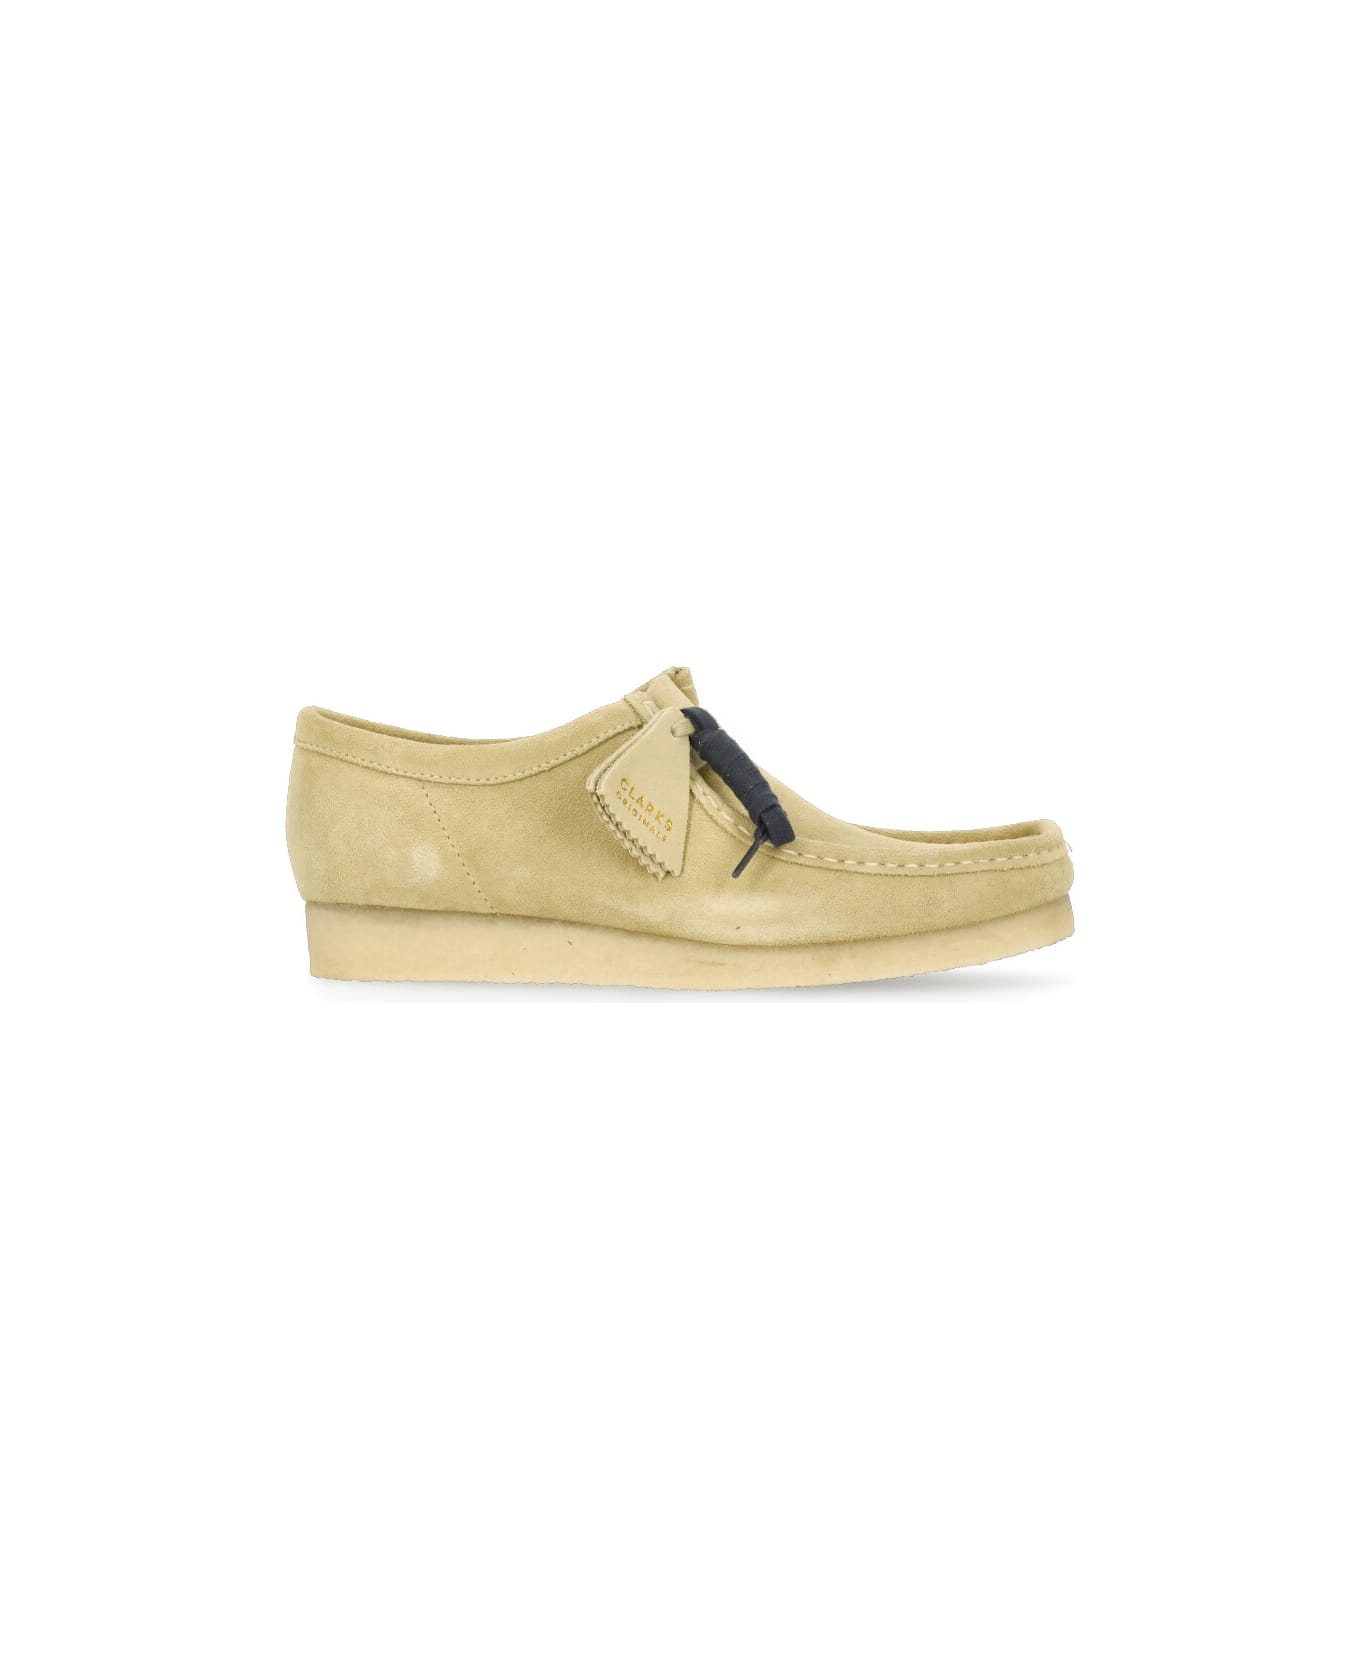 Clarks Wallabee Loafers - Green